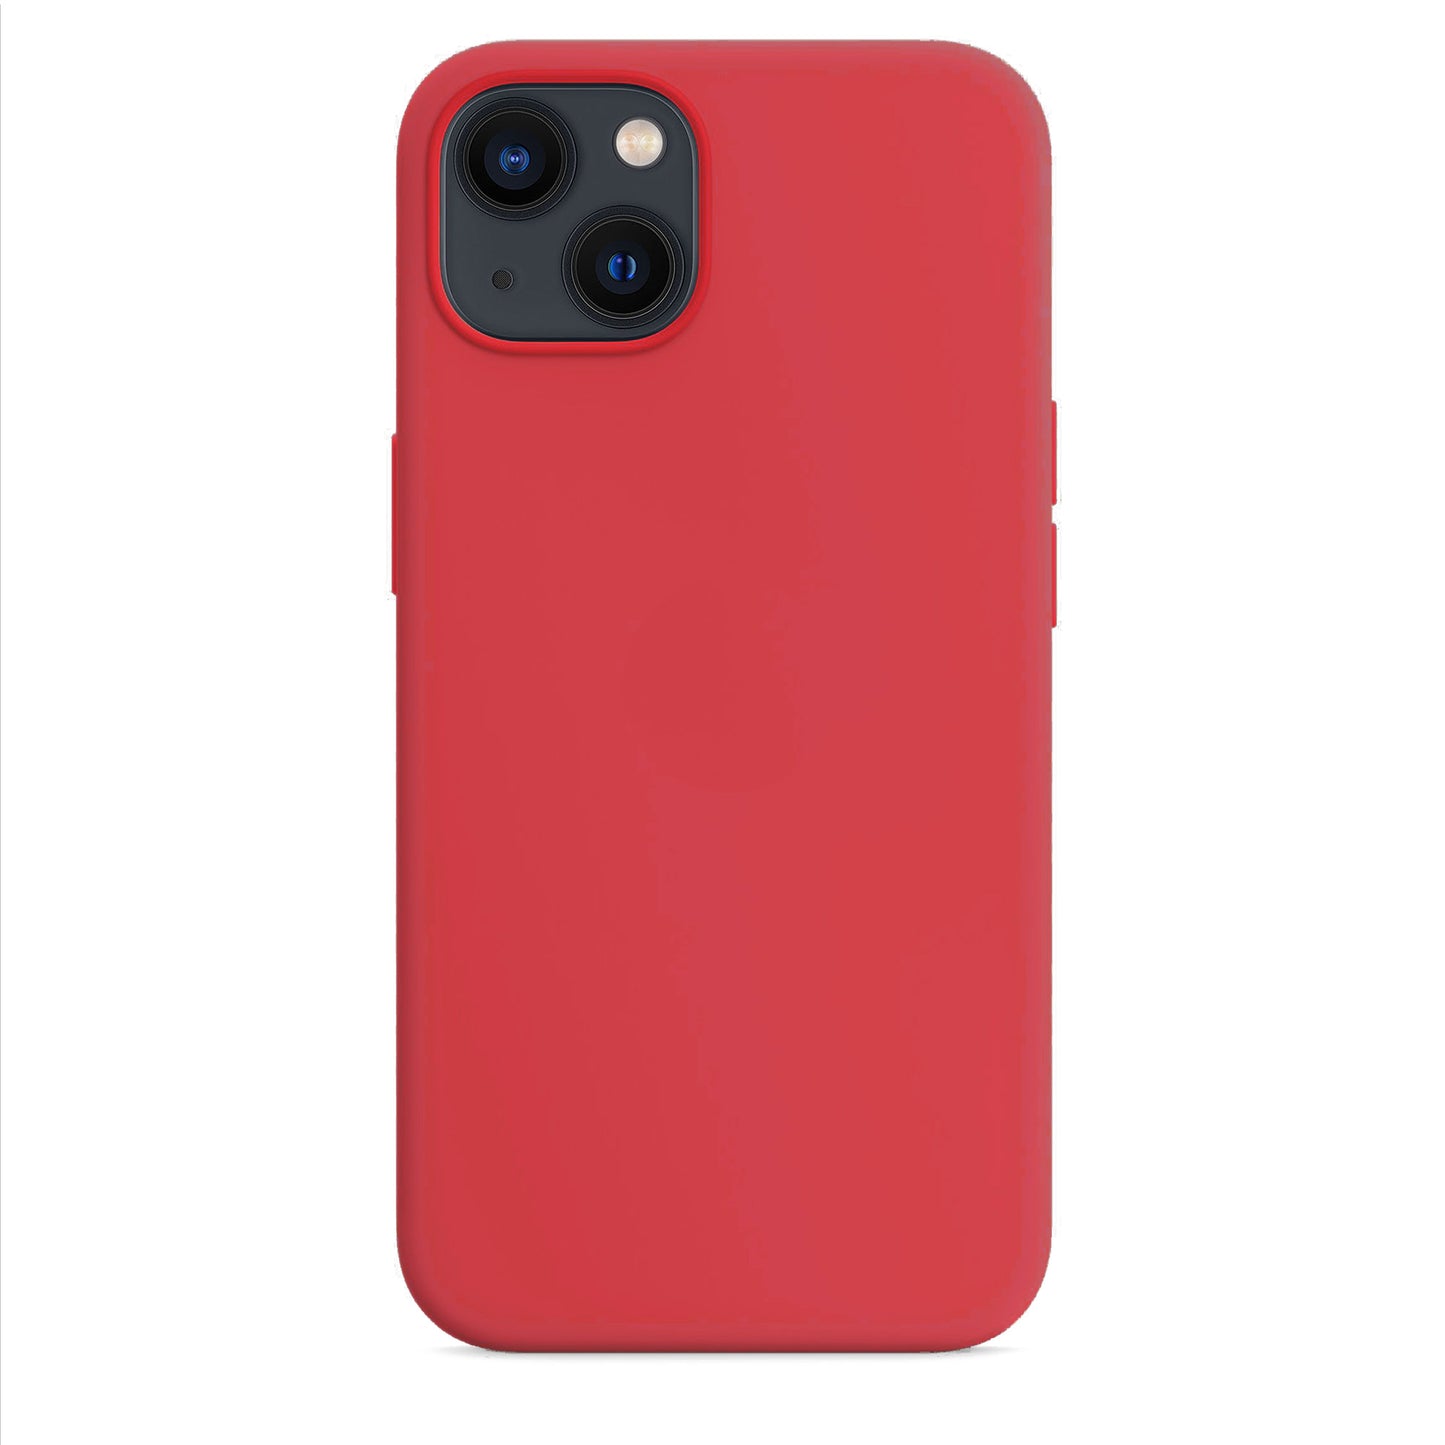 Red silicone case for iPhone